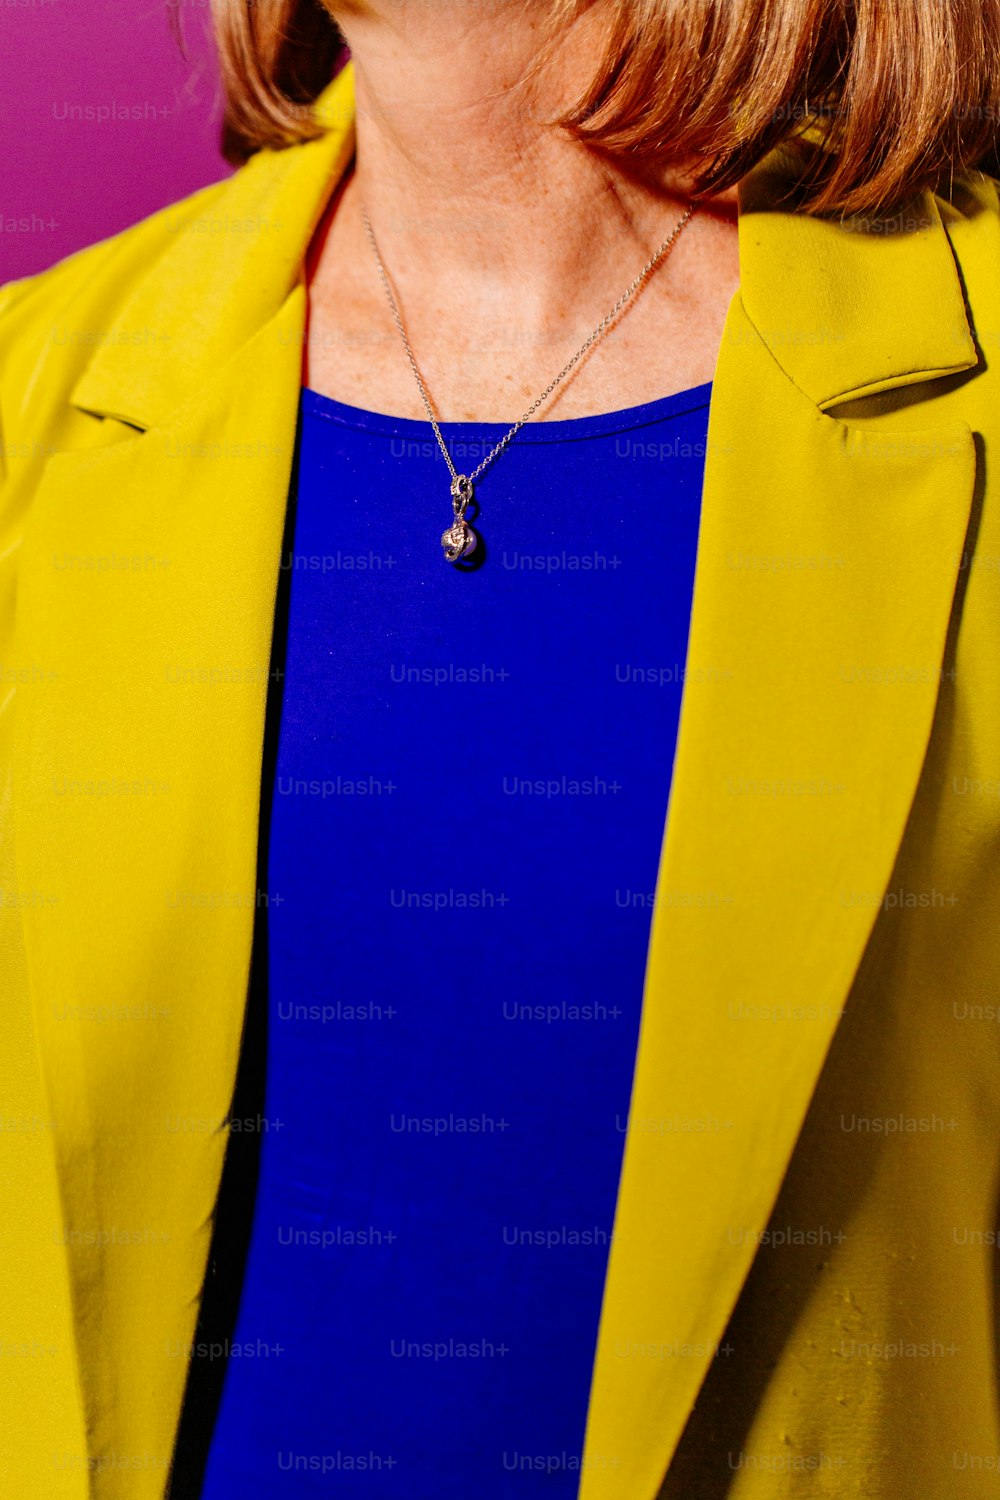 a woman wearing a yellow jacket and a blue top